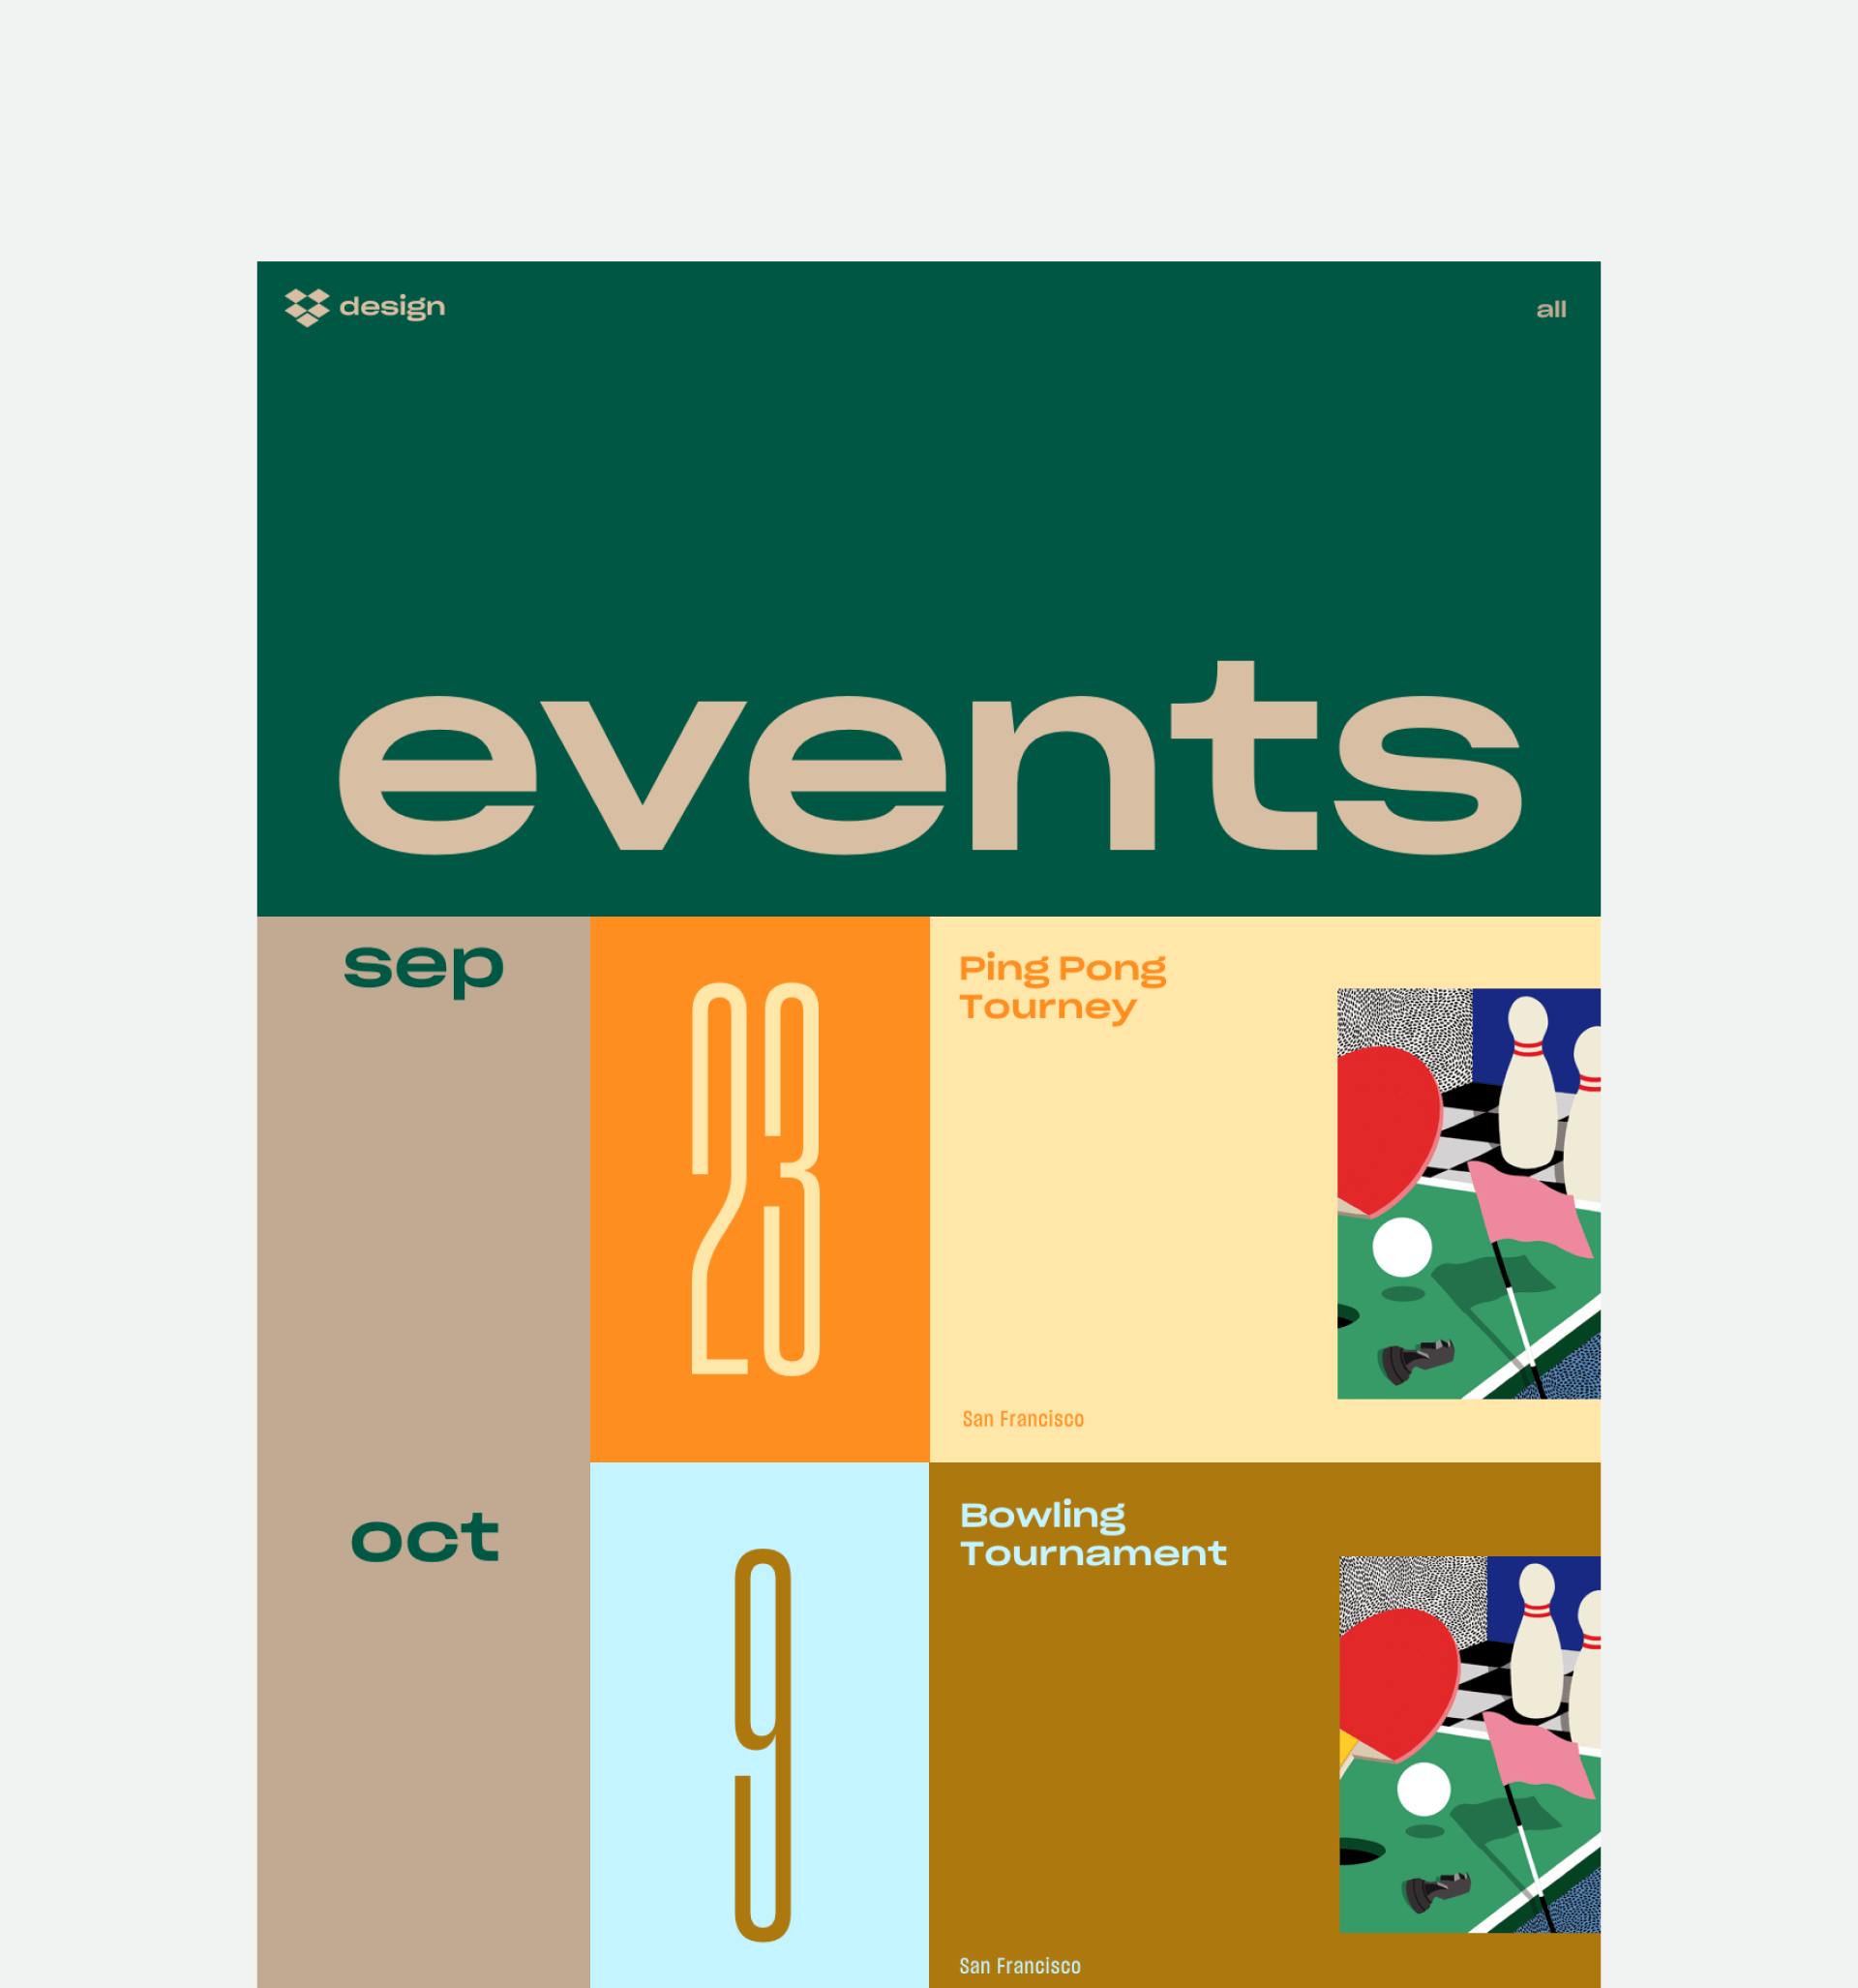 Dropbox events page